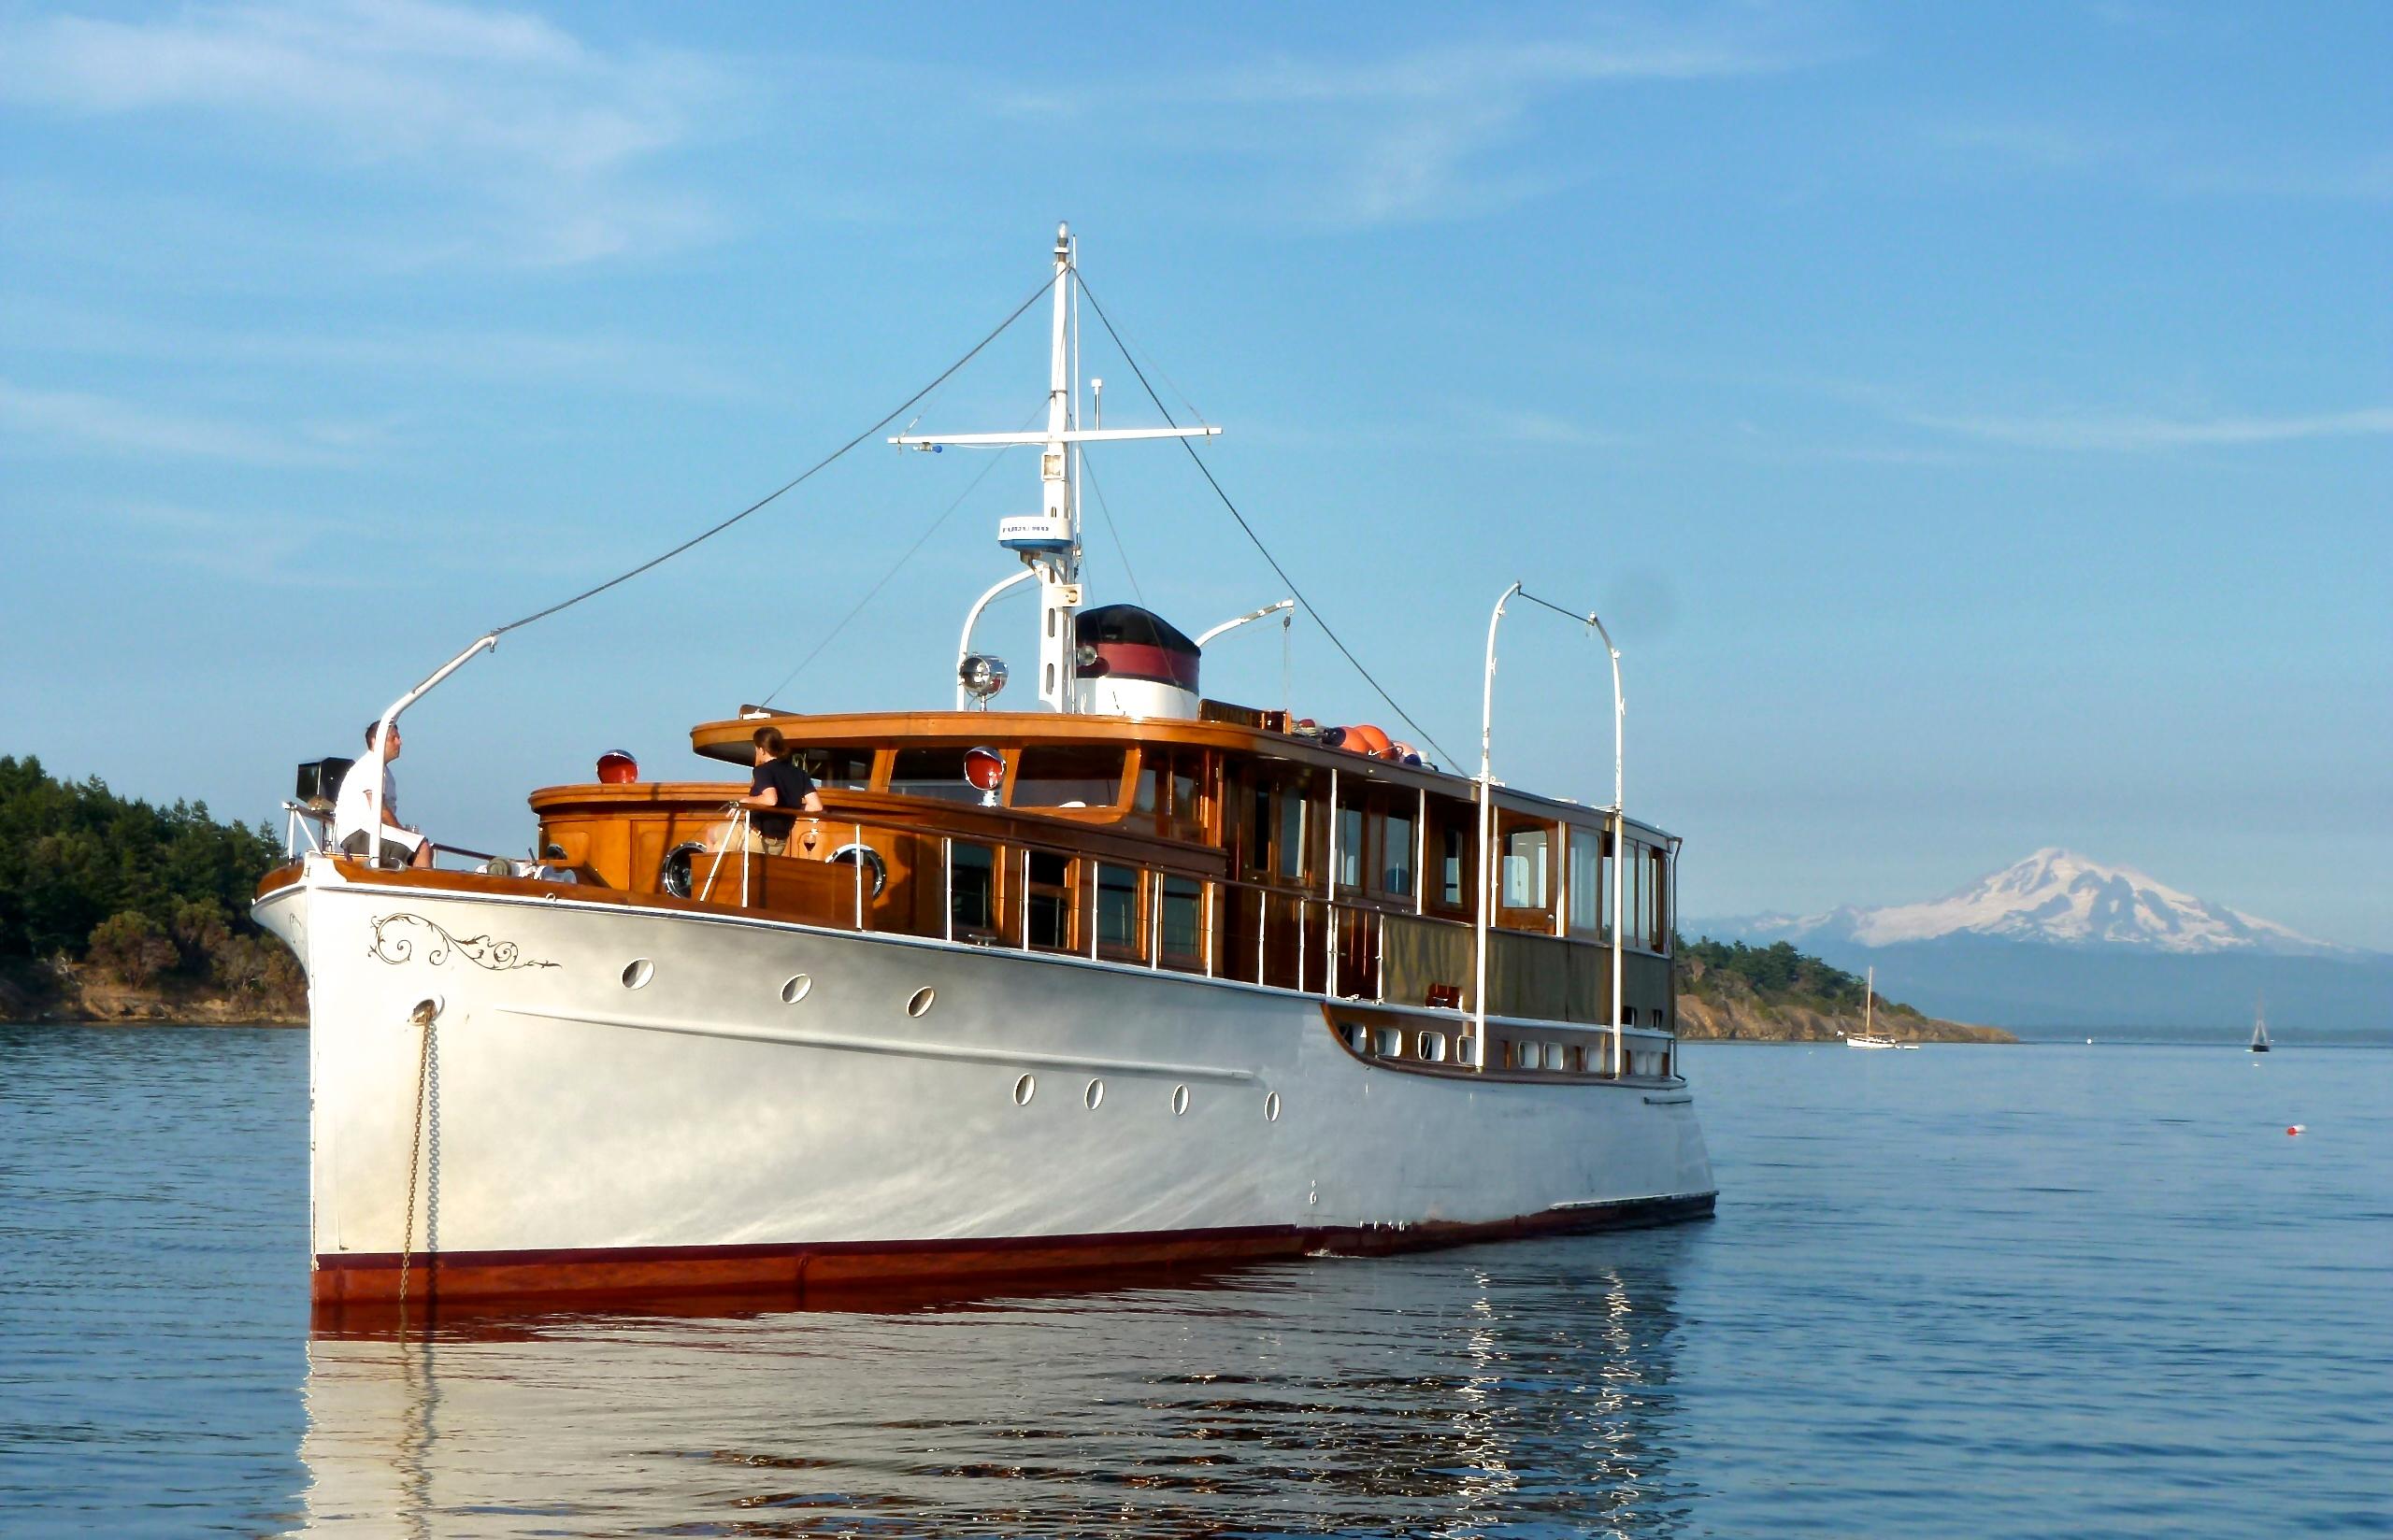 Seattle Yacht For Sale 78 Classic 1932 M/Y LINMAR Seattle, Washington Sold on 2021-03-15 by  Denison Yacht Sales